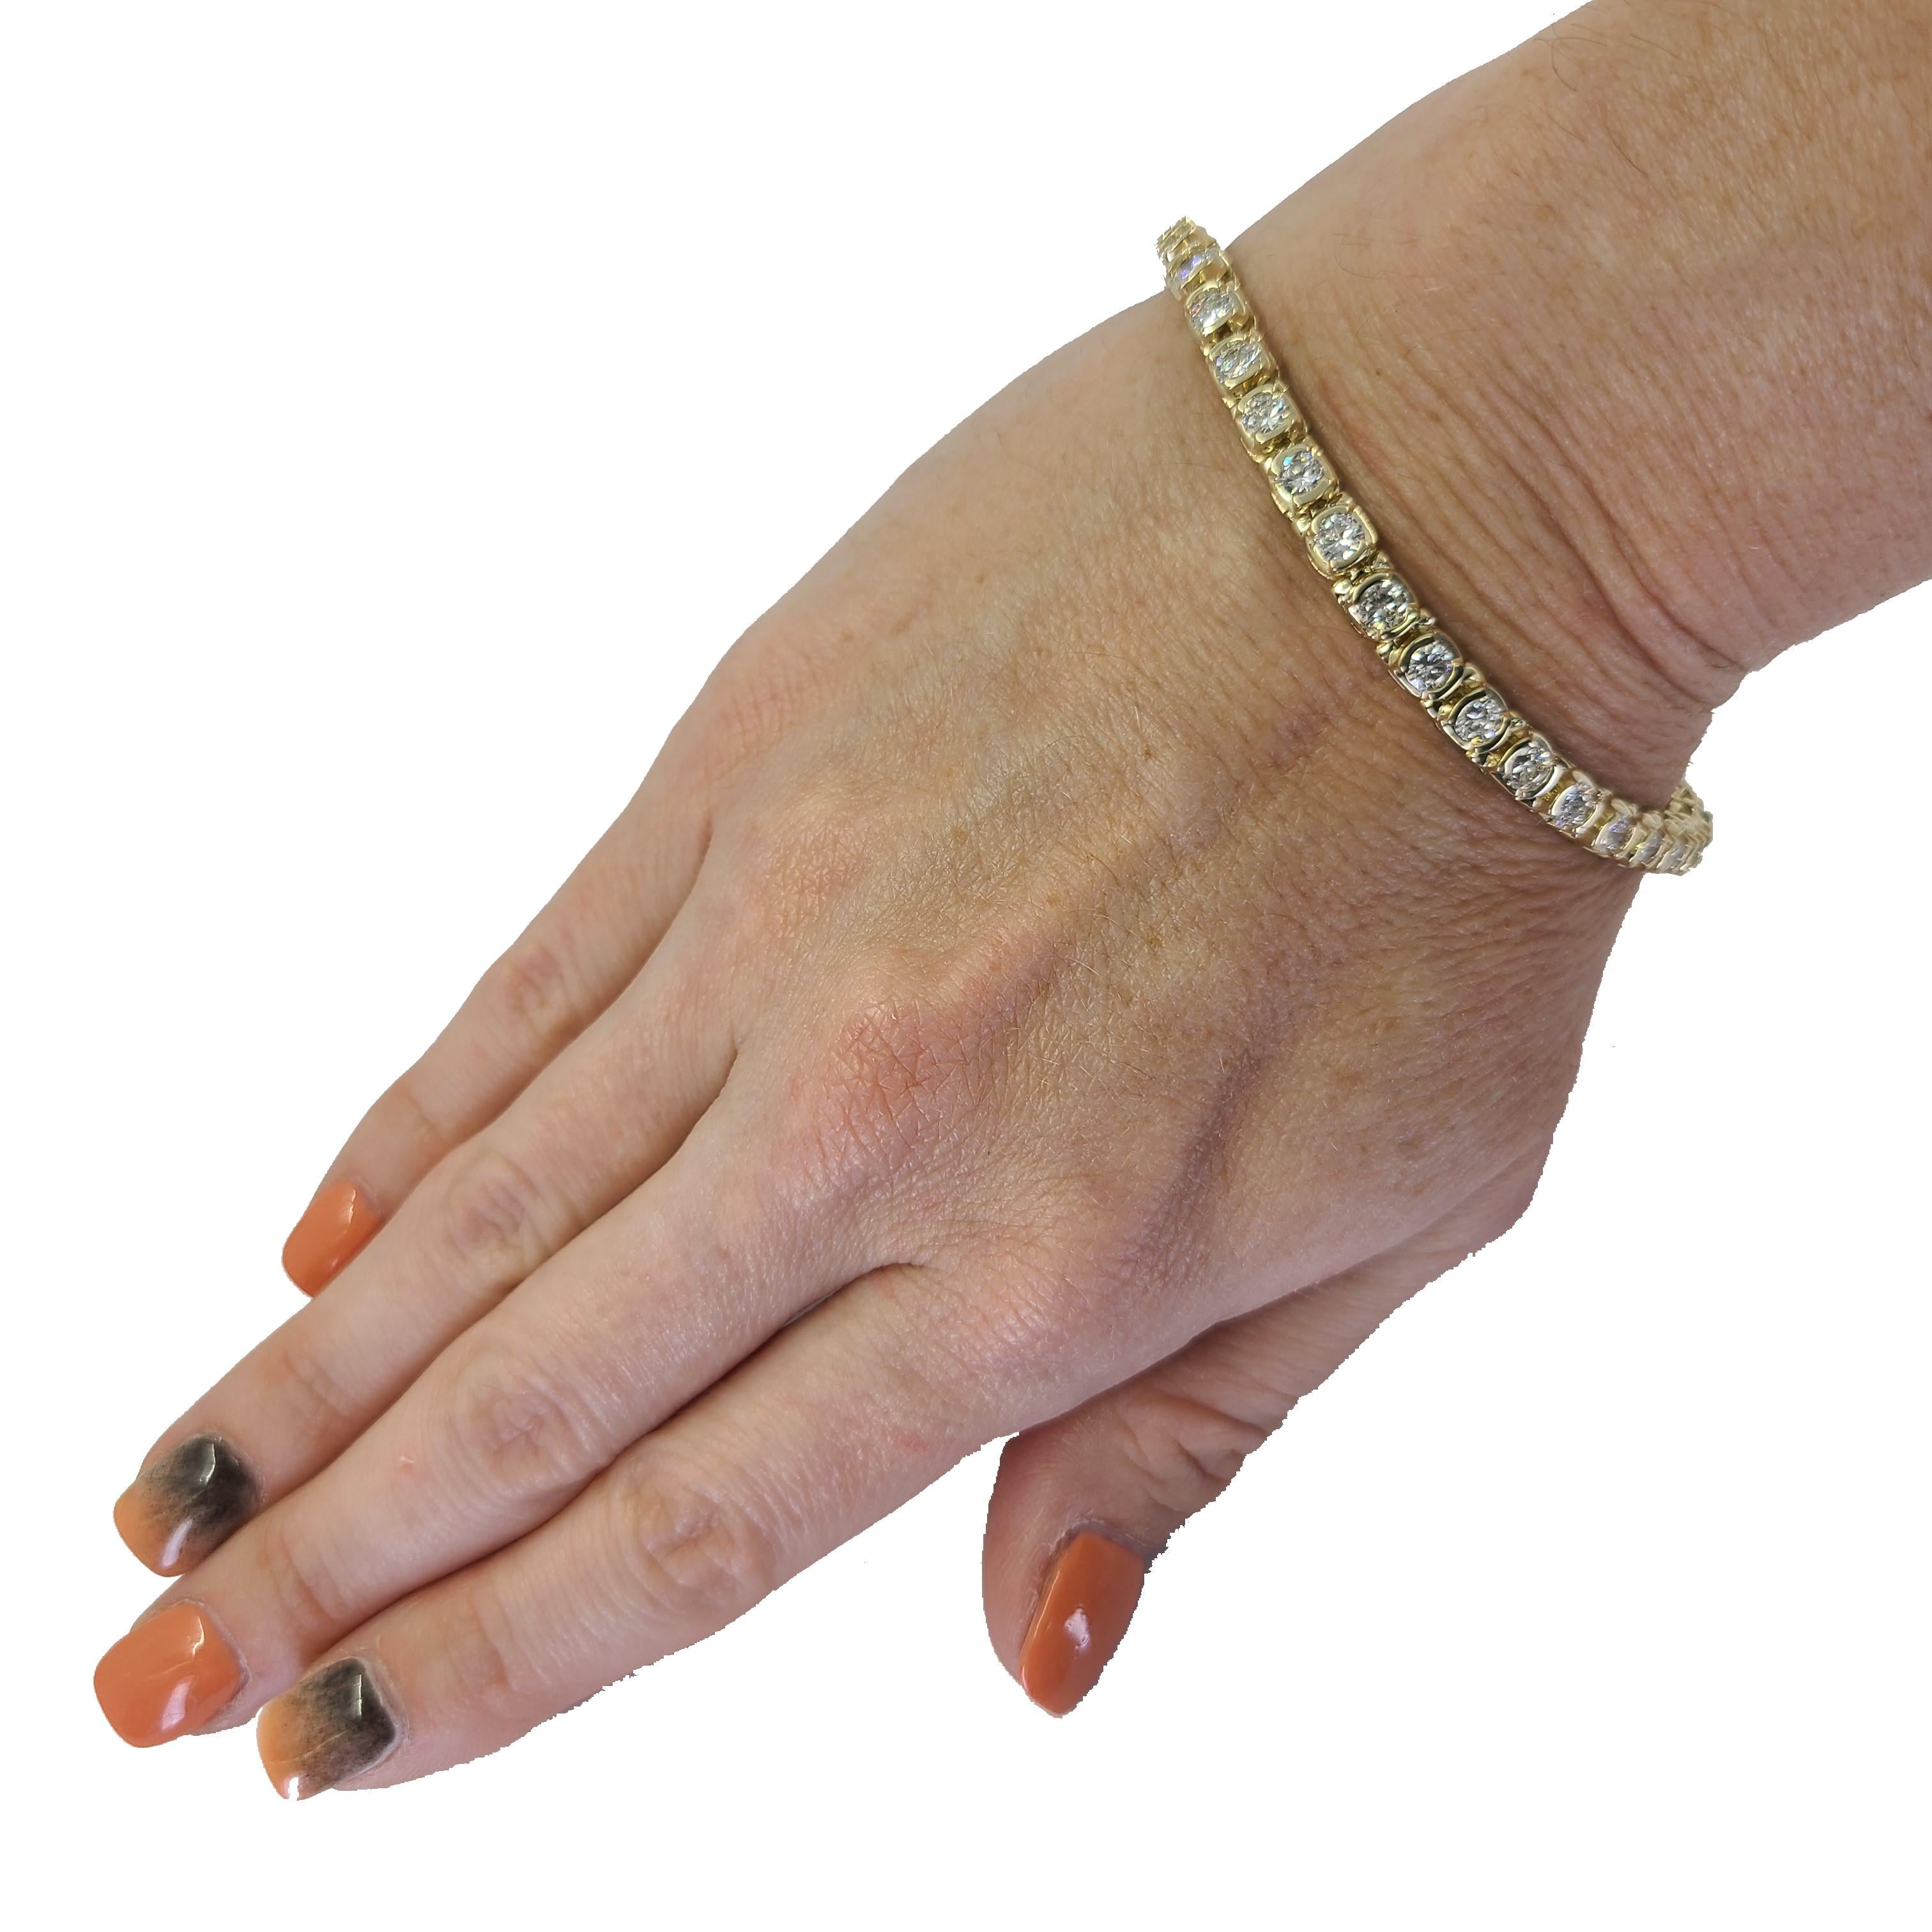 14 Karat Yellow Gold Line Bracelet Featuring 34 Half Bezel Set Round Brilliant Cut Diamonds Of SI Clarity & H Color Totaling 5.20 Carats. 7.1 Inch Length. Finished Weight Is 19 Grams.